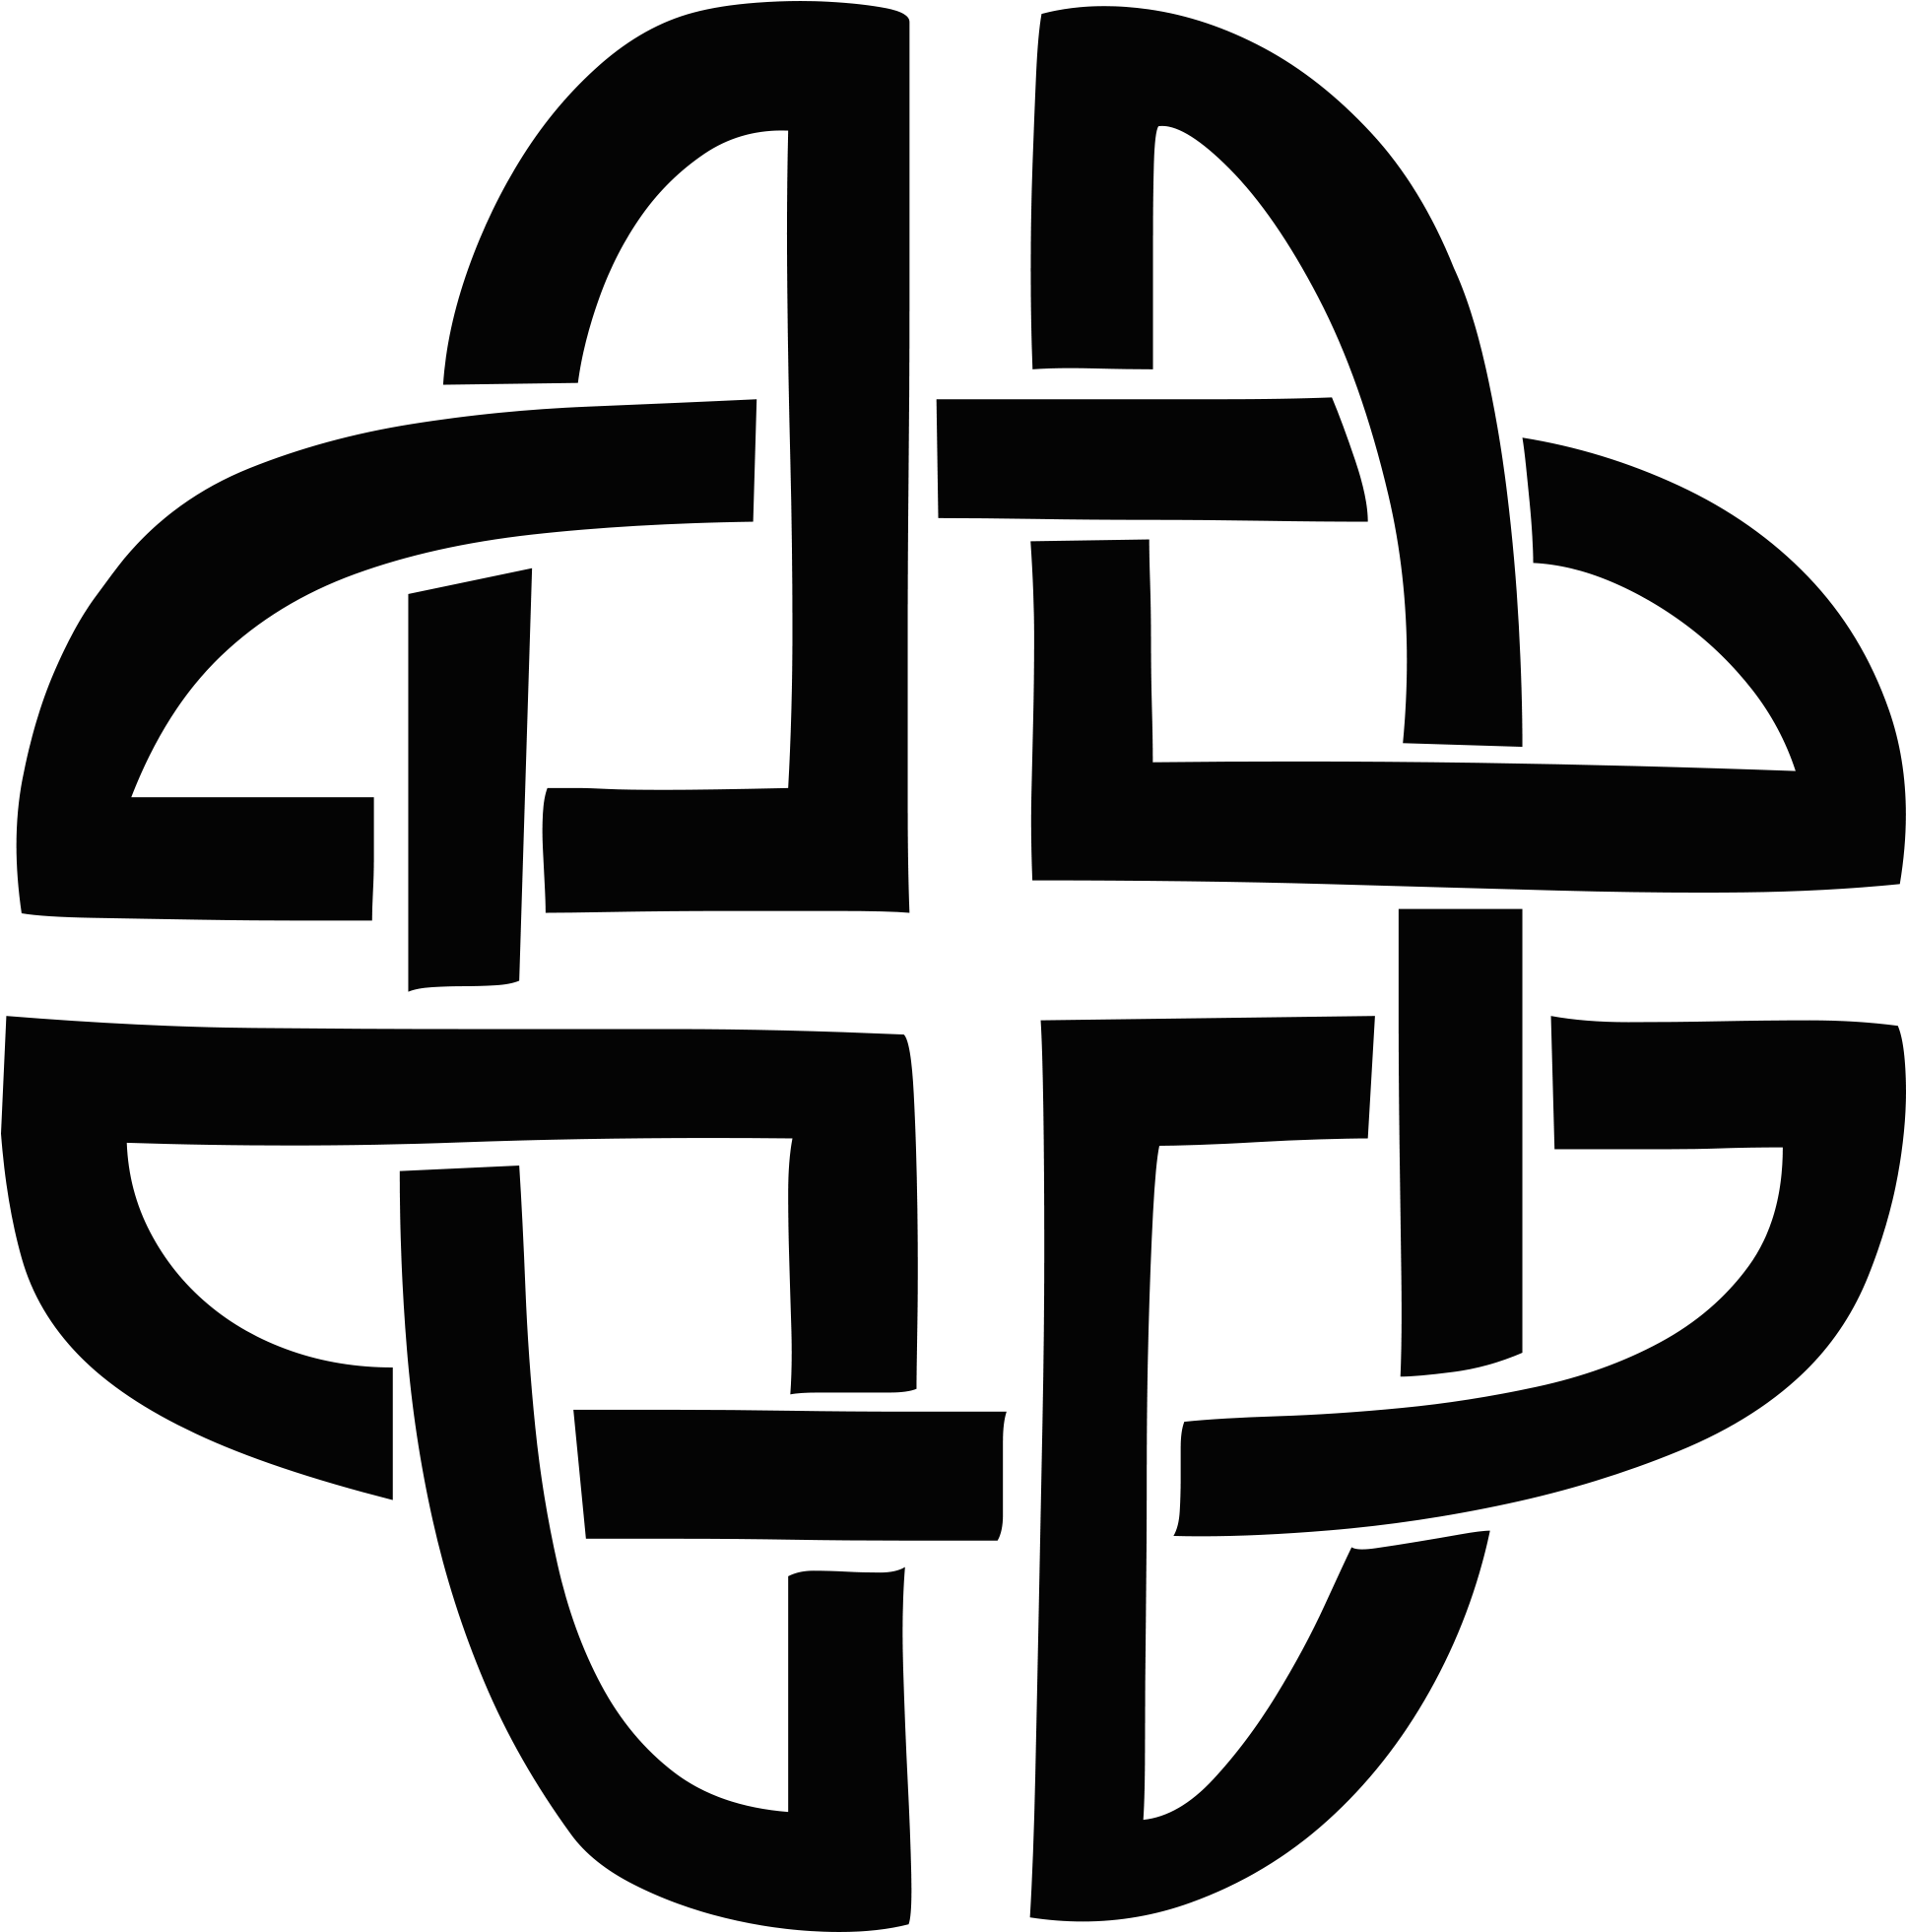 A Black And White Image Of A Celtic Knot